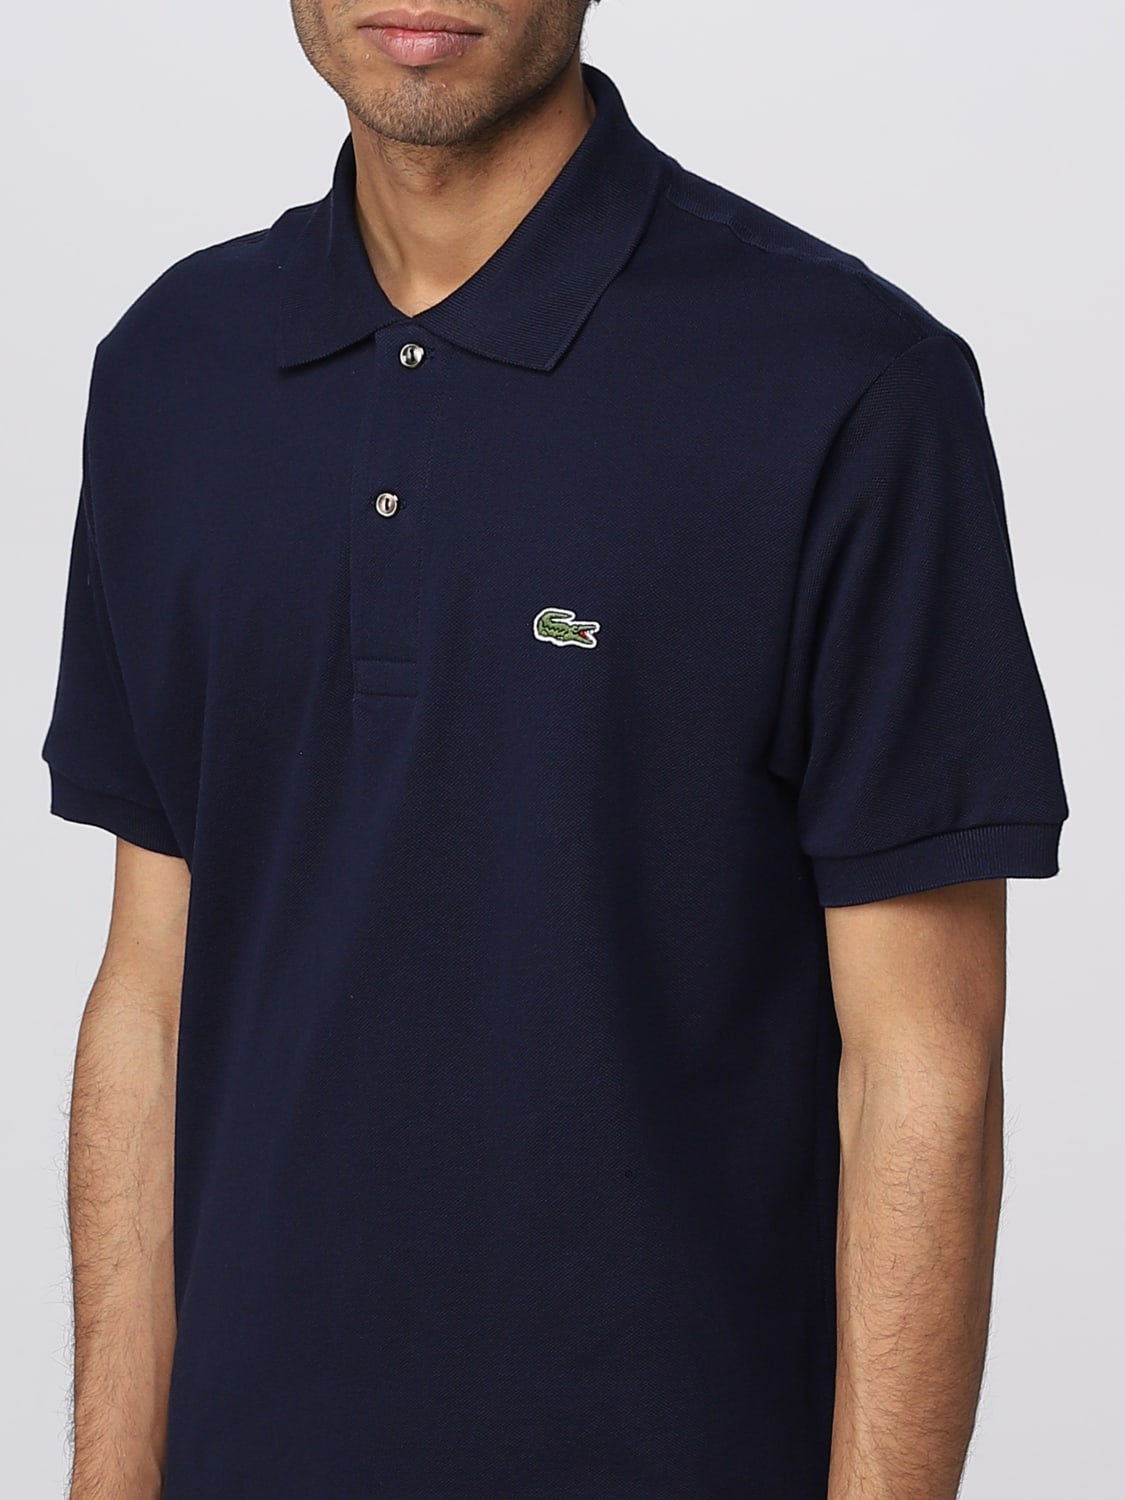 L1212 man polo shirt polo Navy Lacoste online for at - Lacoste Outlet: | shirt